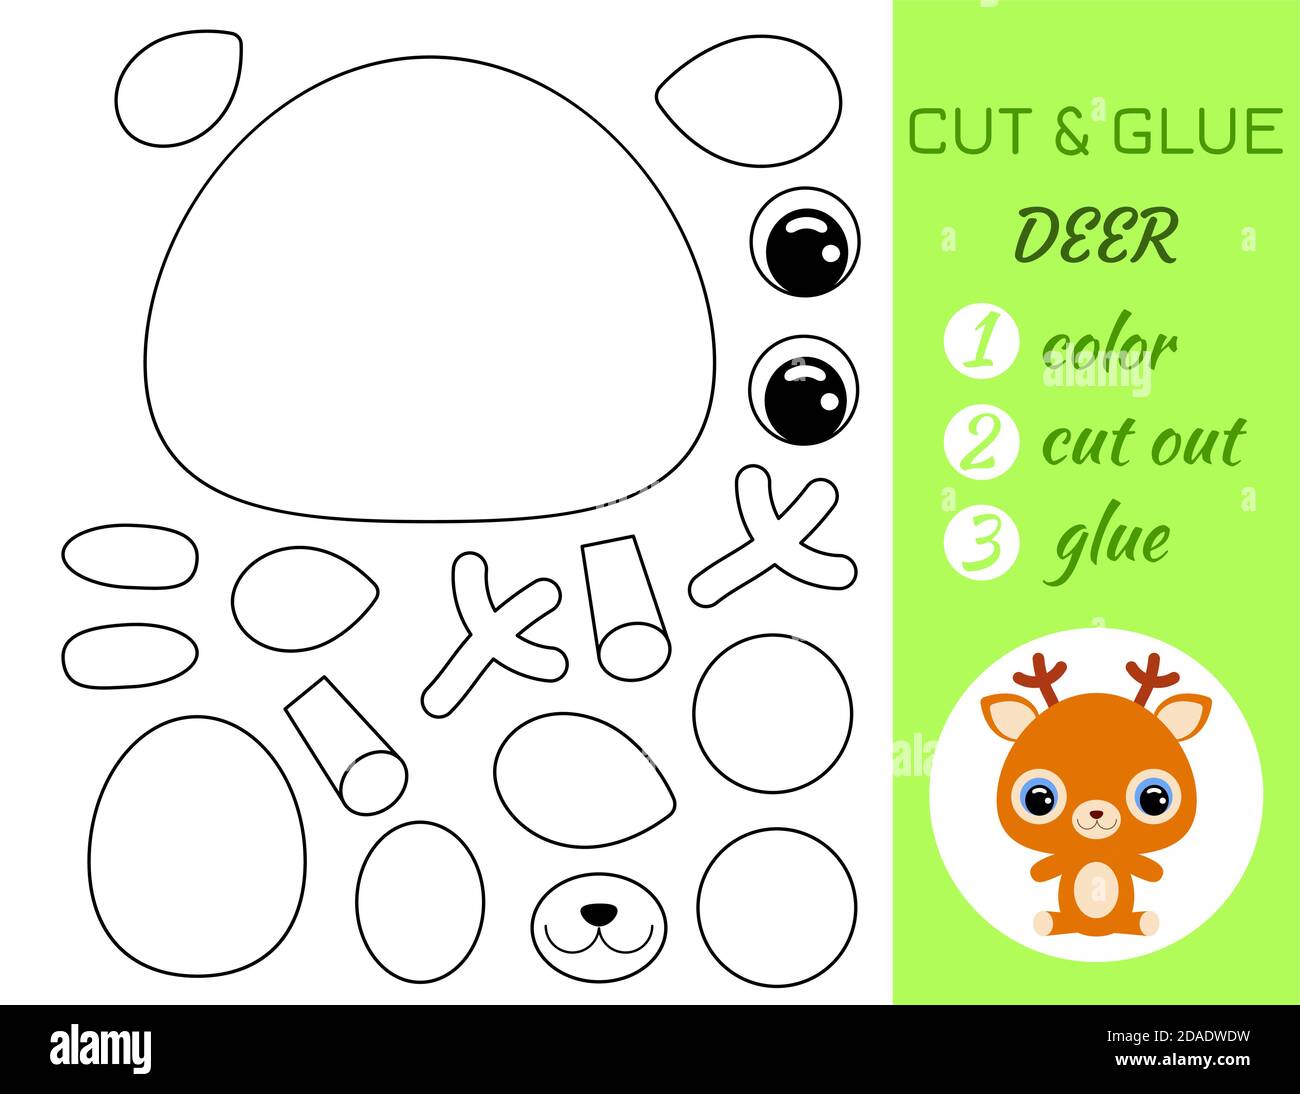 Simple educational game coloring page cut and glue sitting baby deer for kids educational paper game for preschool children color cut parts and glu stock vector image art